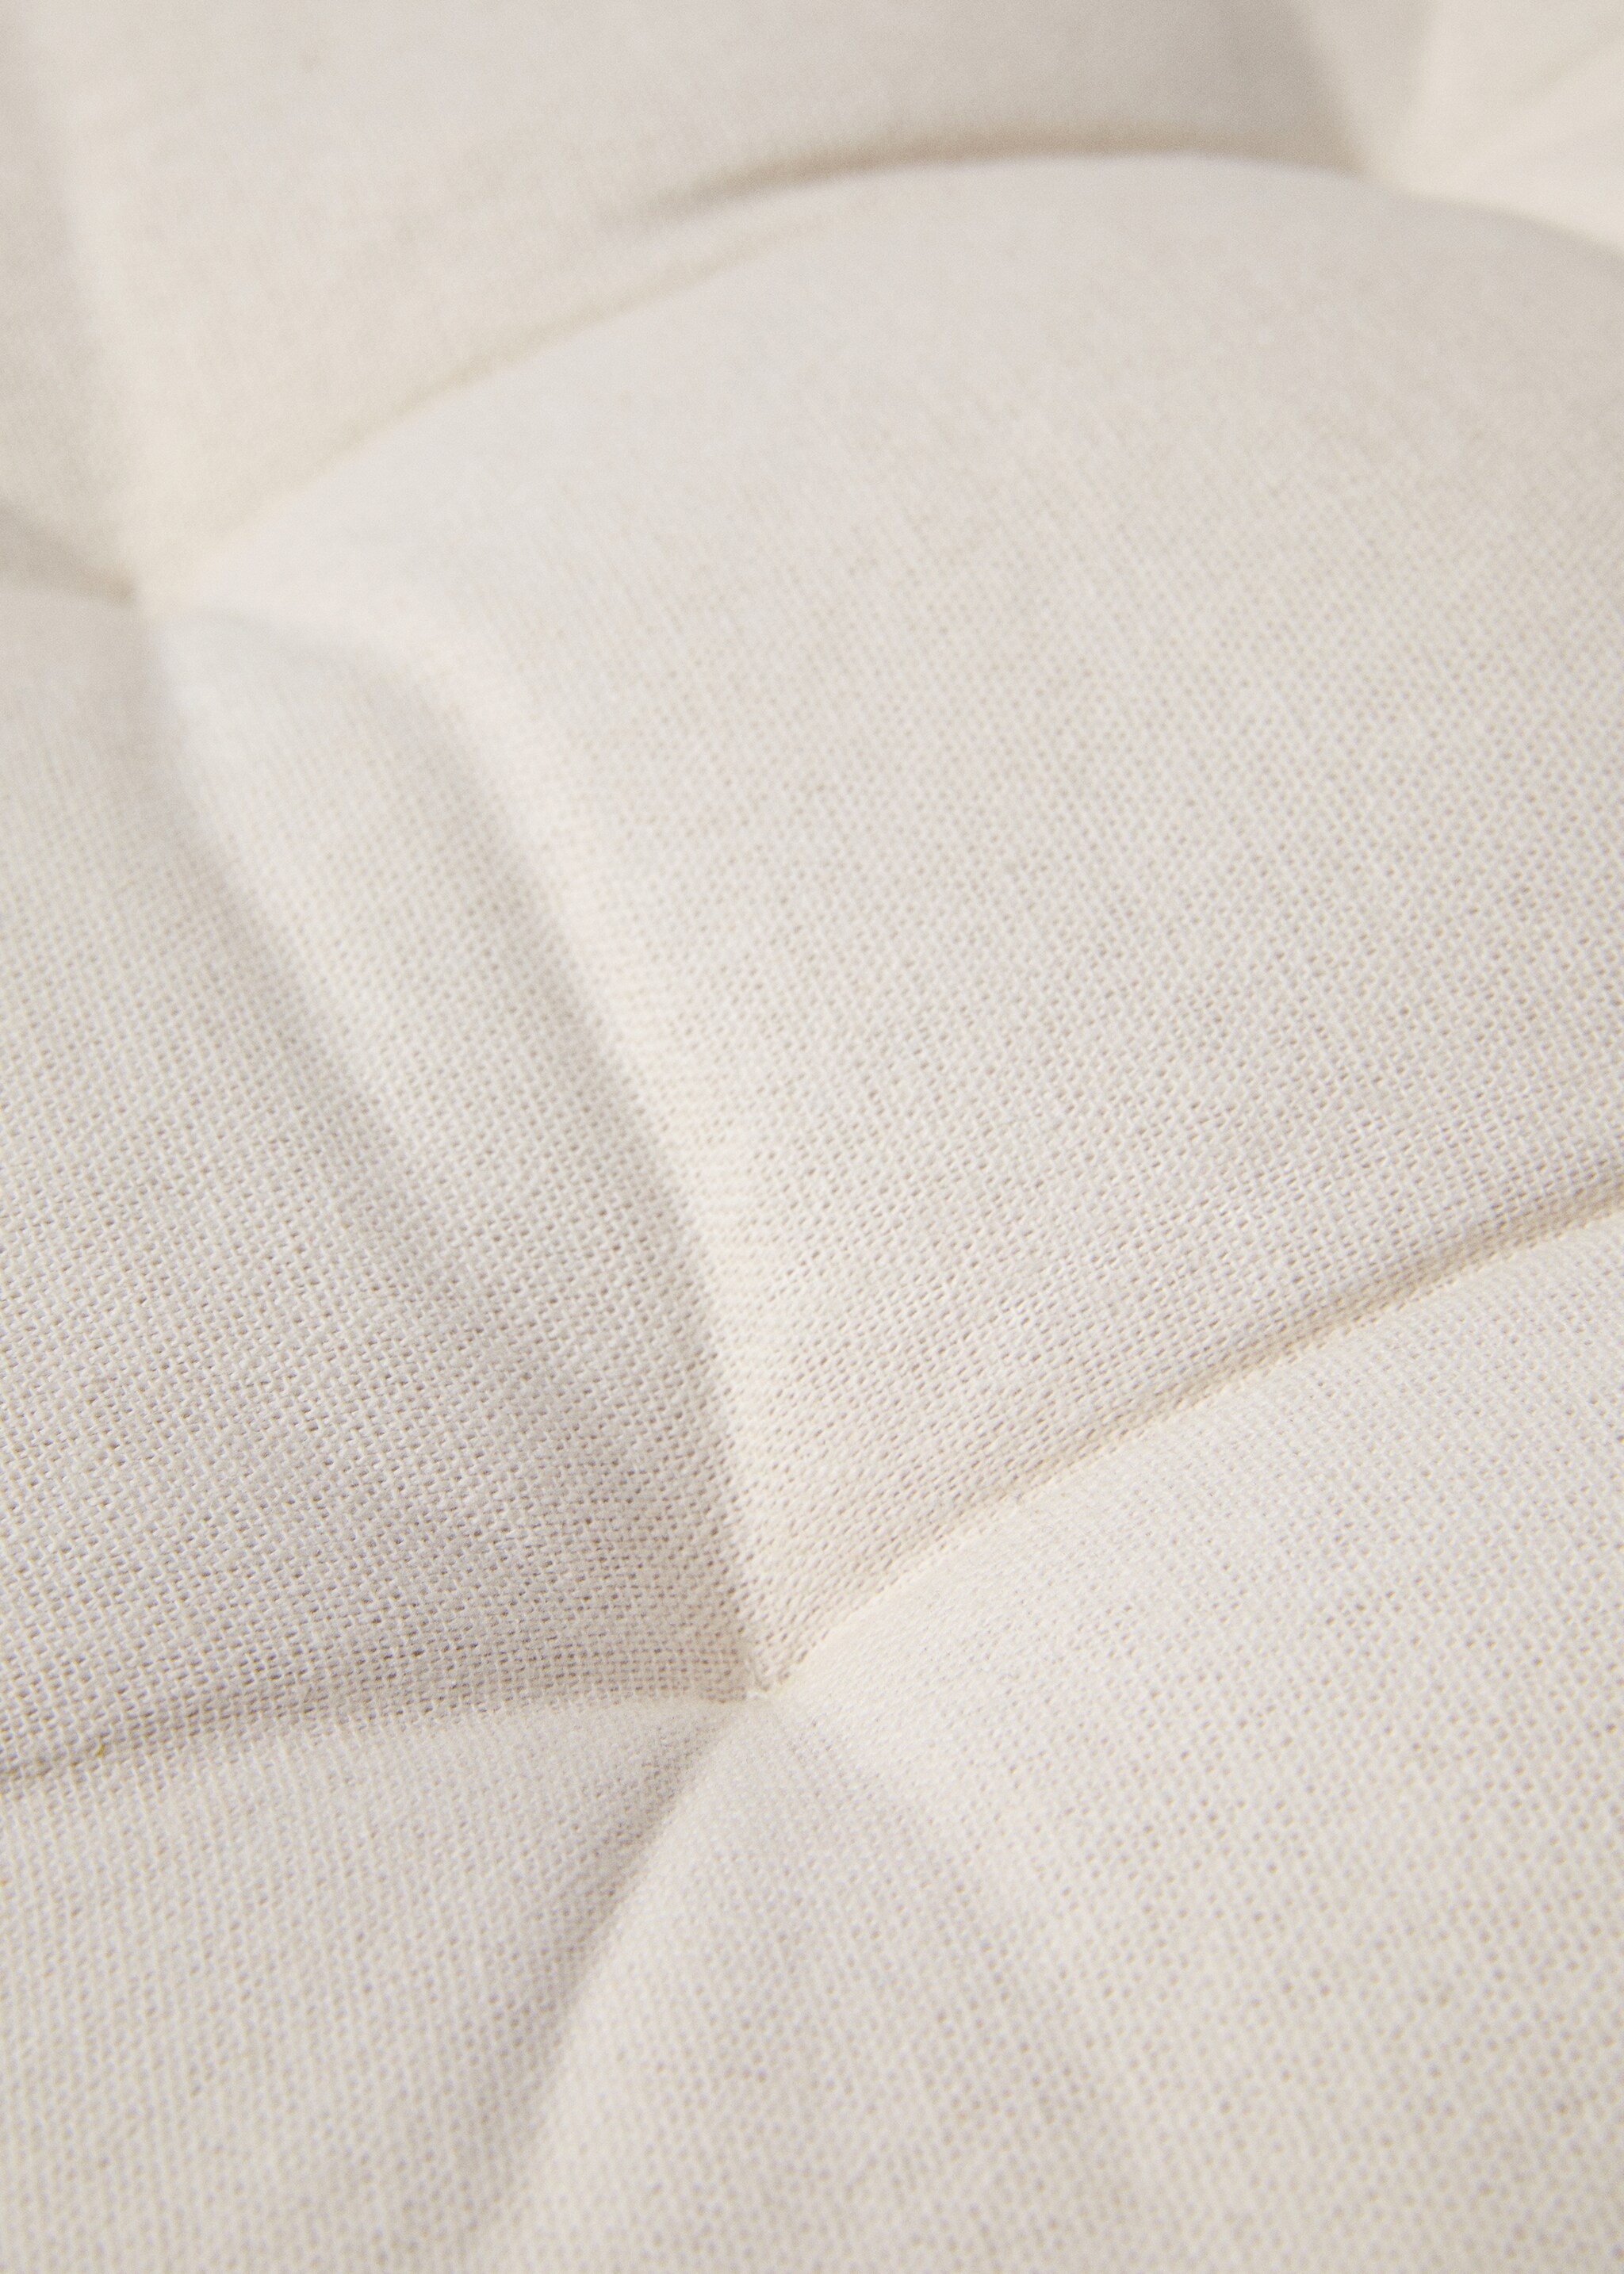 Chair cushion - Details of the article 3